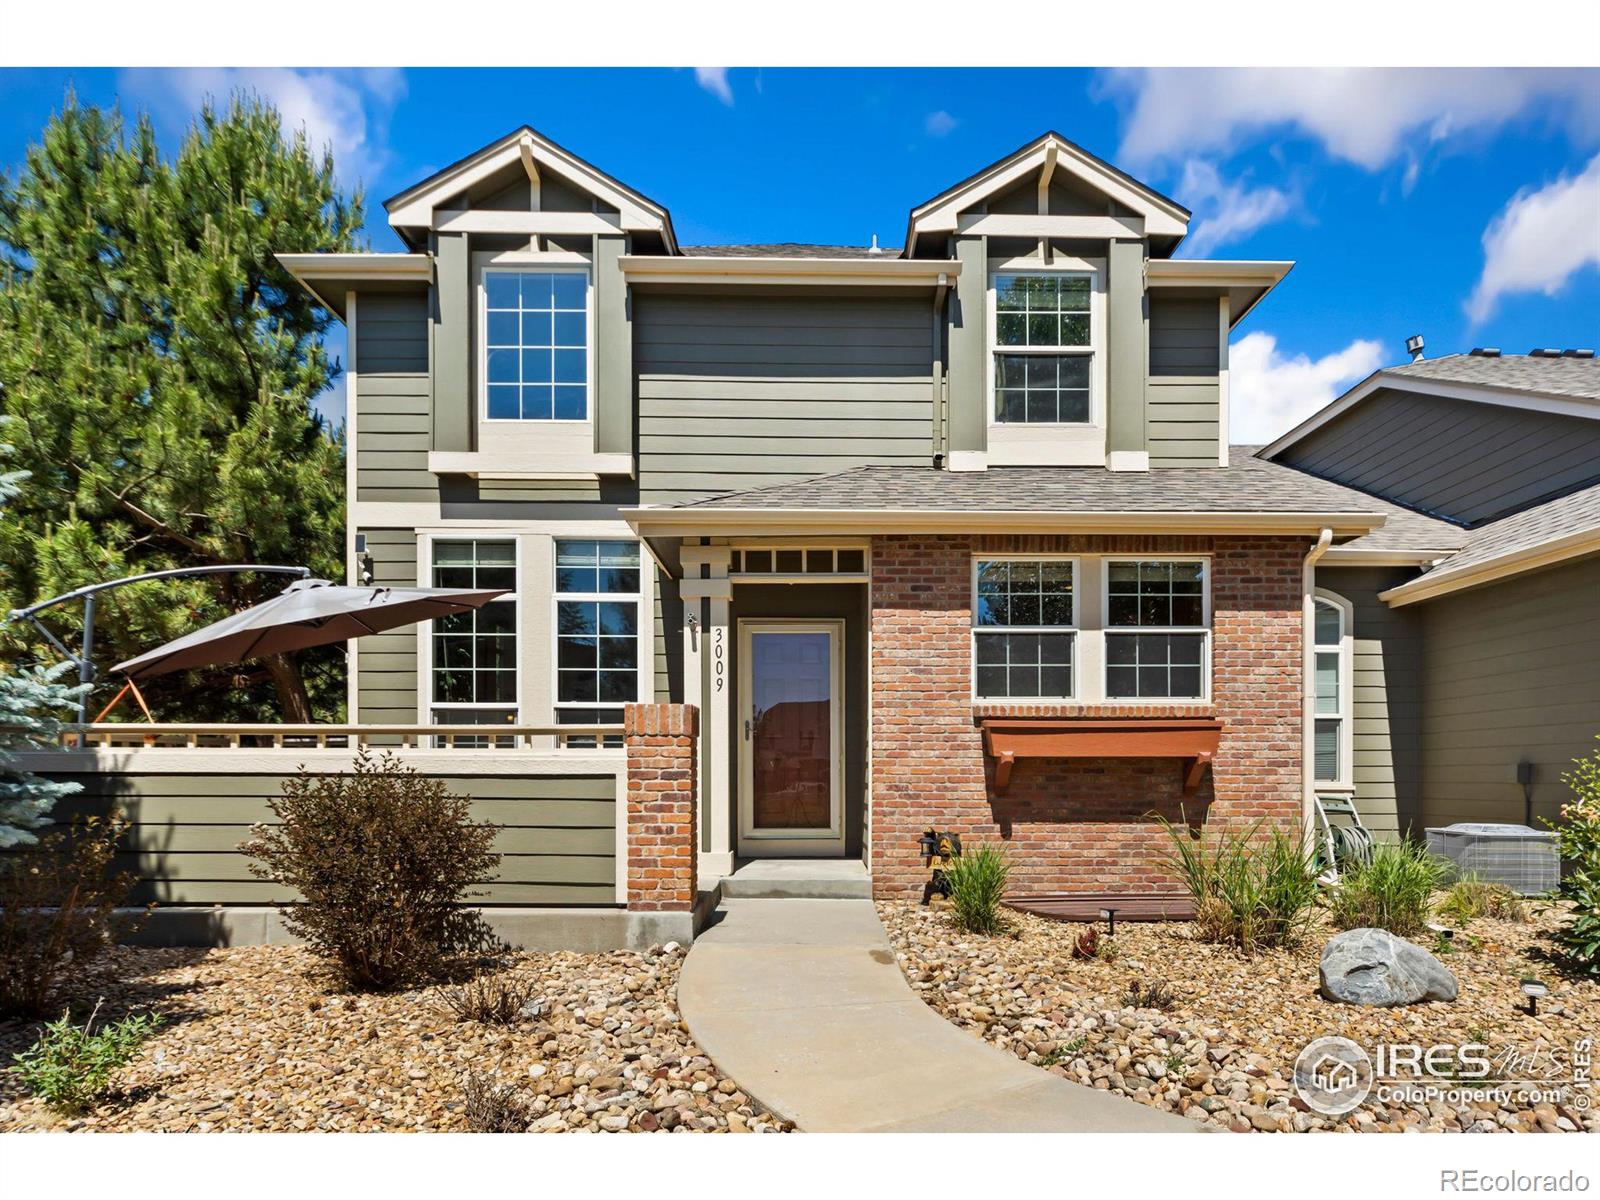 3009  County Fair Lane, fort collins MLS: 4567891011896 Beds: 3 Baths: 3 Price: $580,000